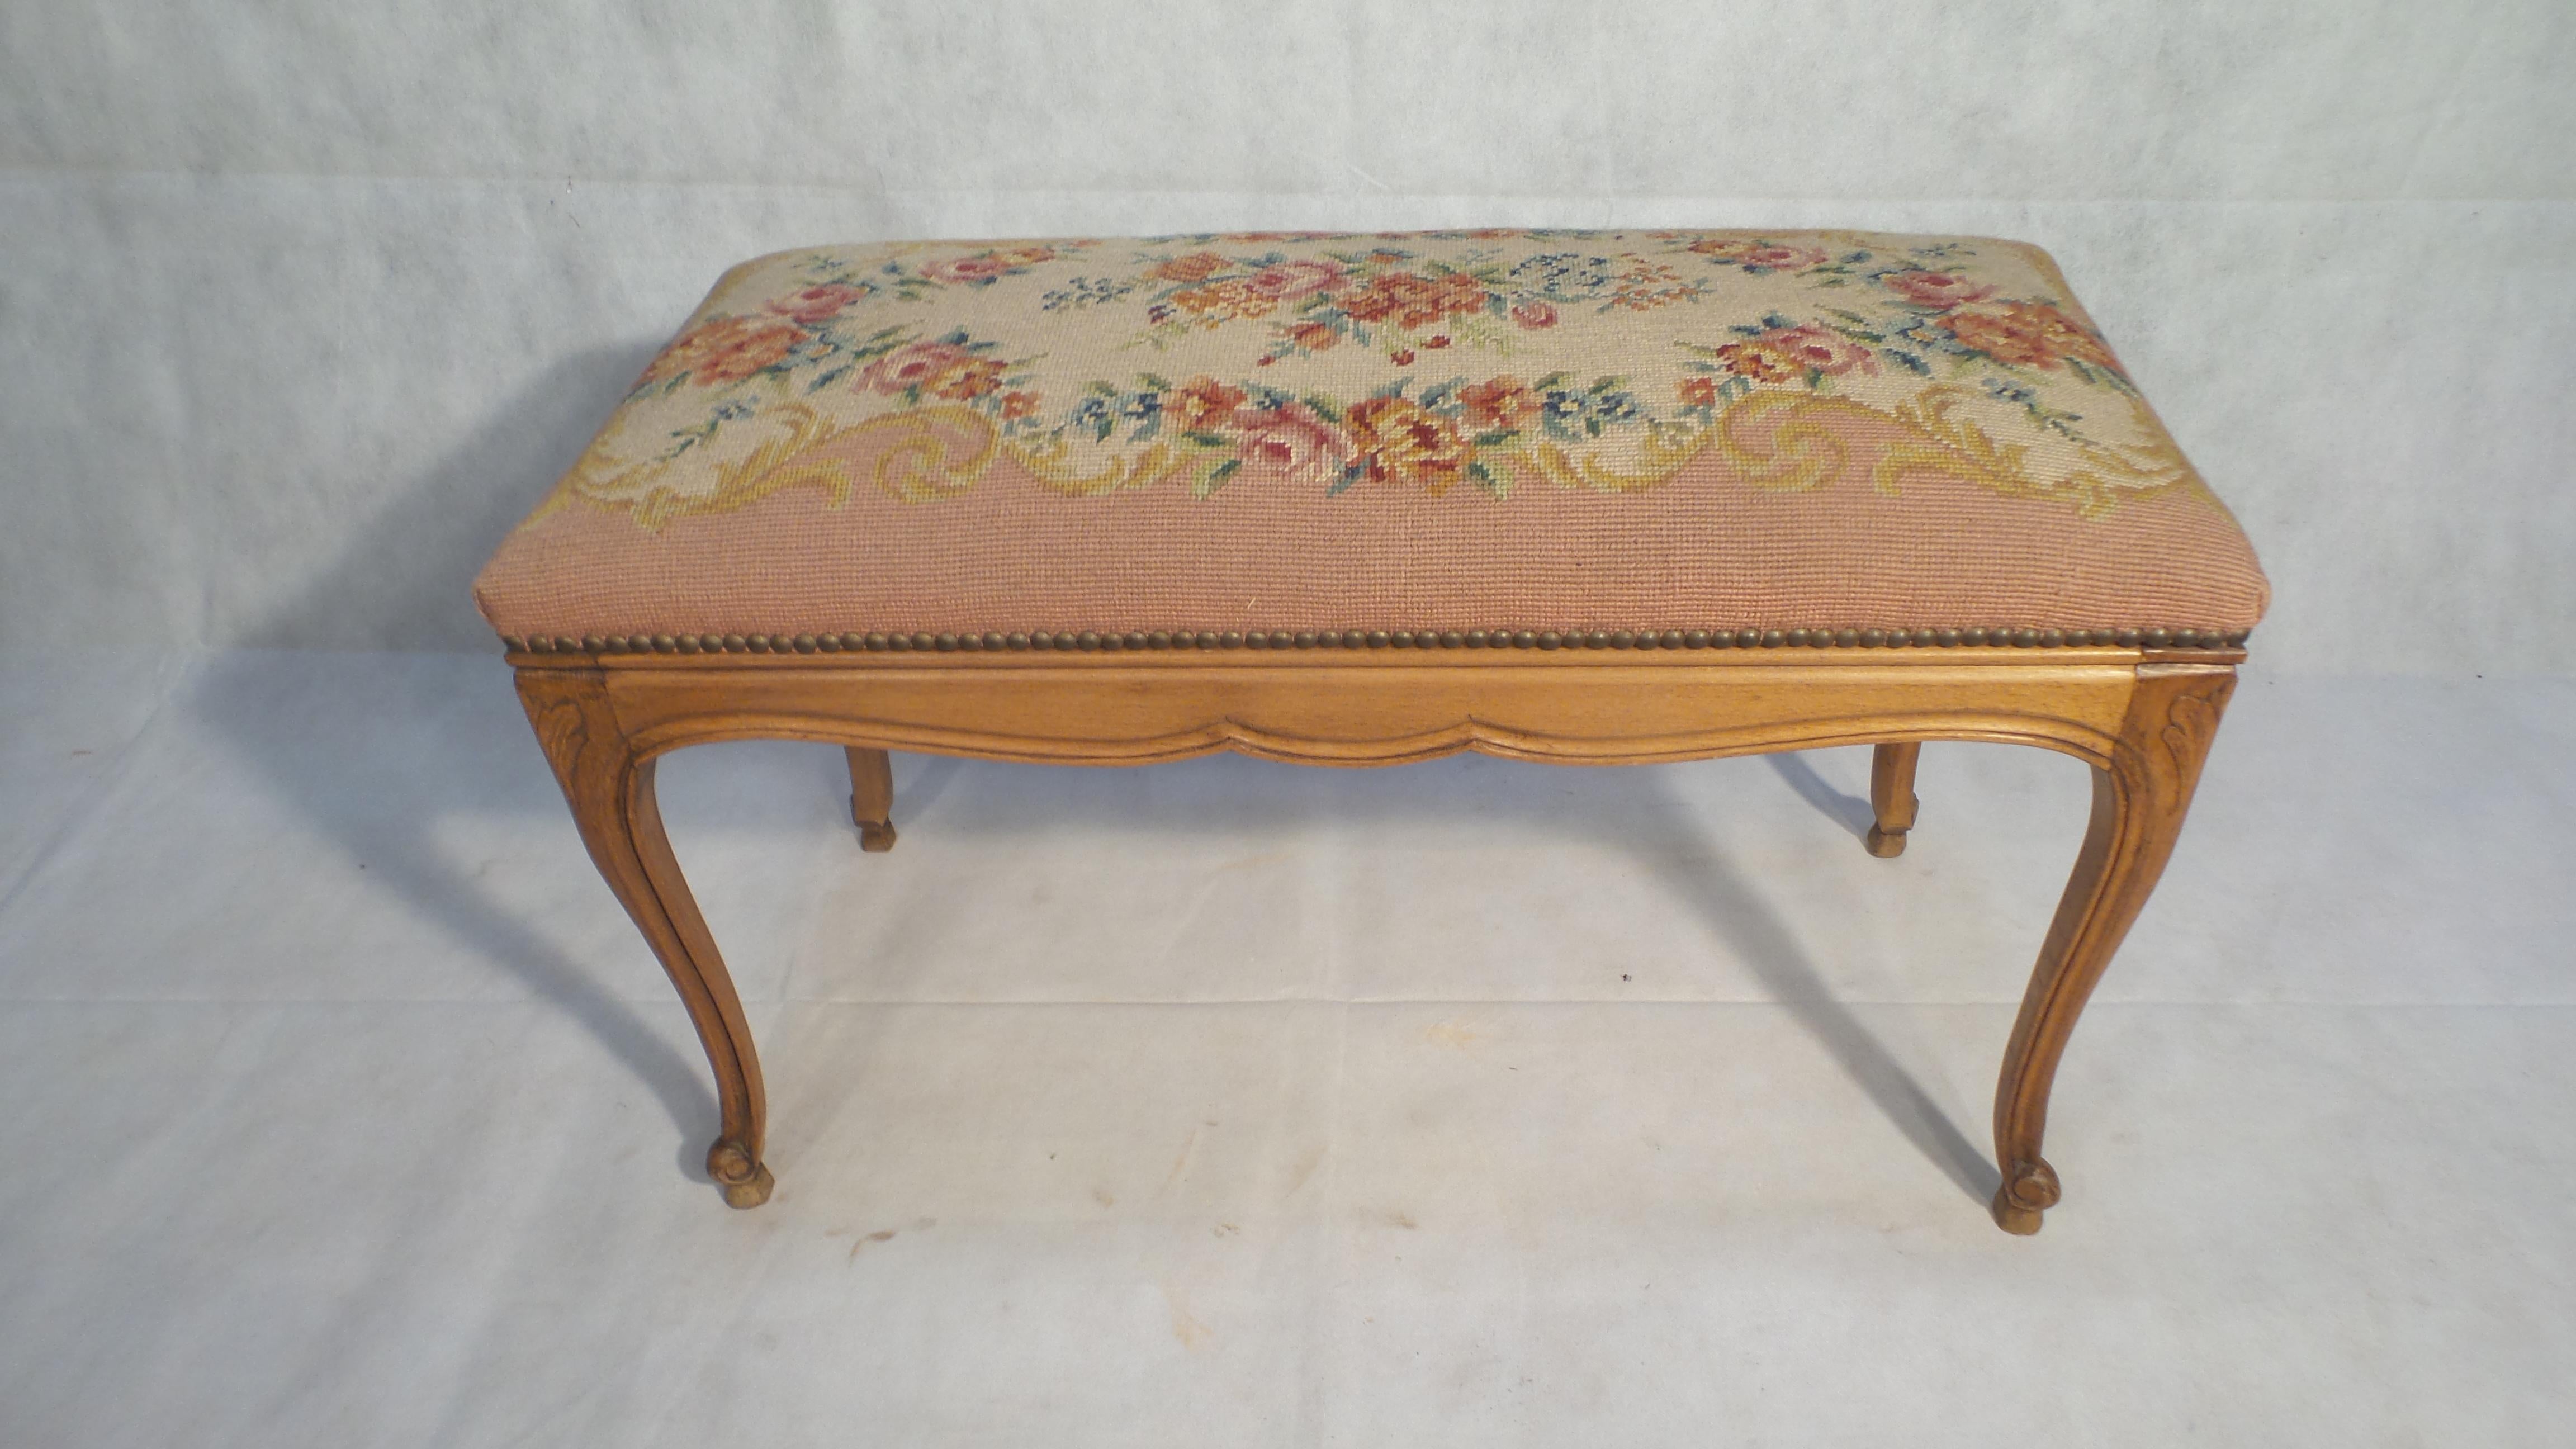 Antique French Handmade Tapestry Footstool in Petit Point In Good Condition For Sale In Blackpool, Lancashire